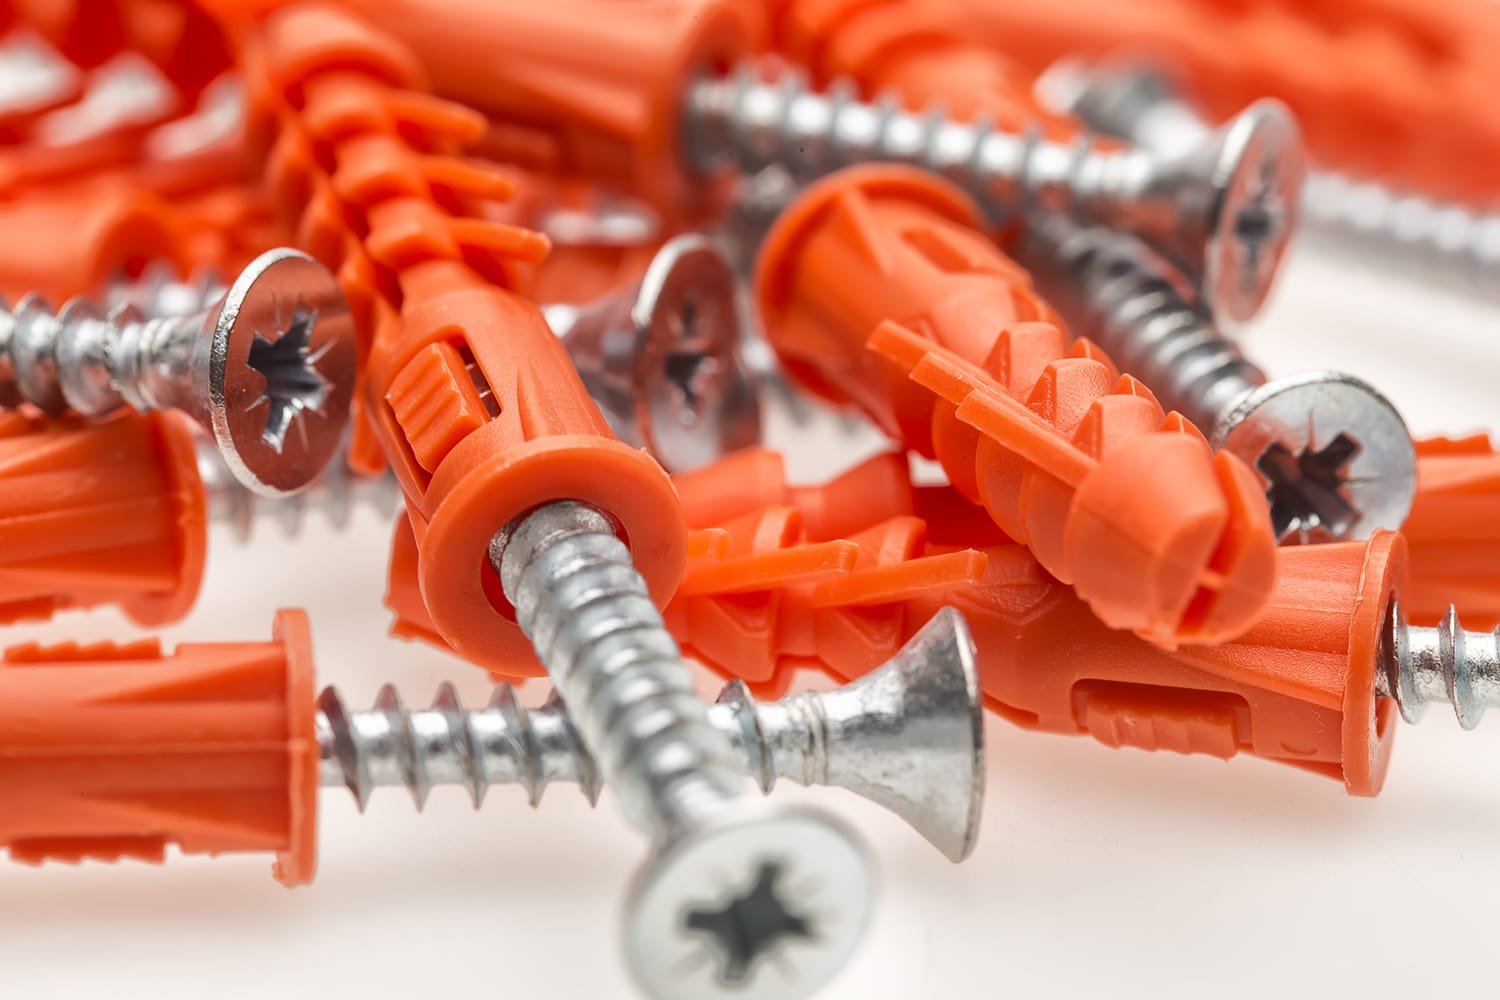 This is a cover photo for our Best Wall Anchors article. It features a pile of orange wall anchors with preset screws inserted.